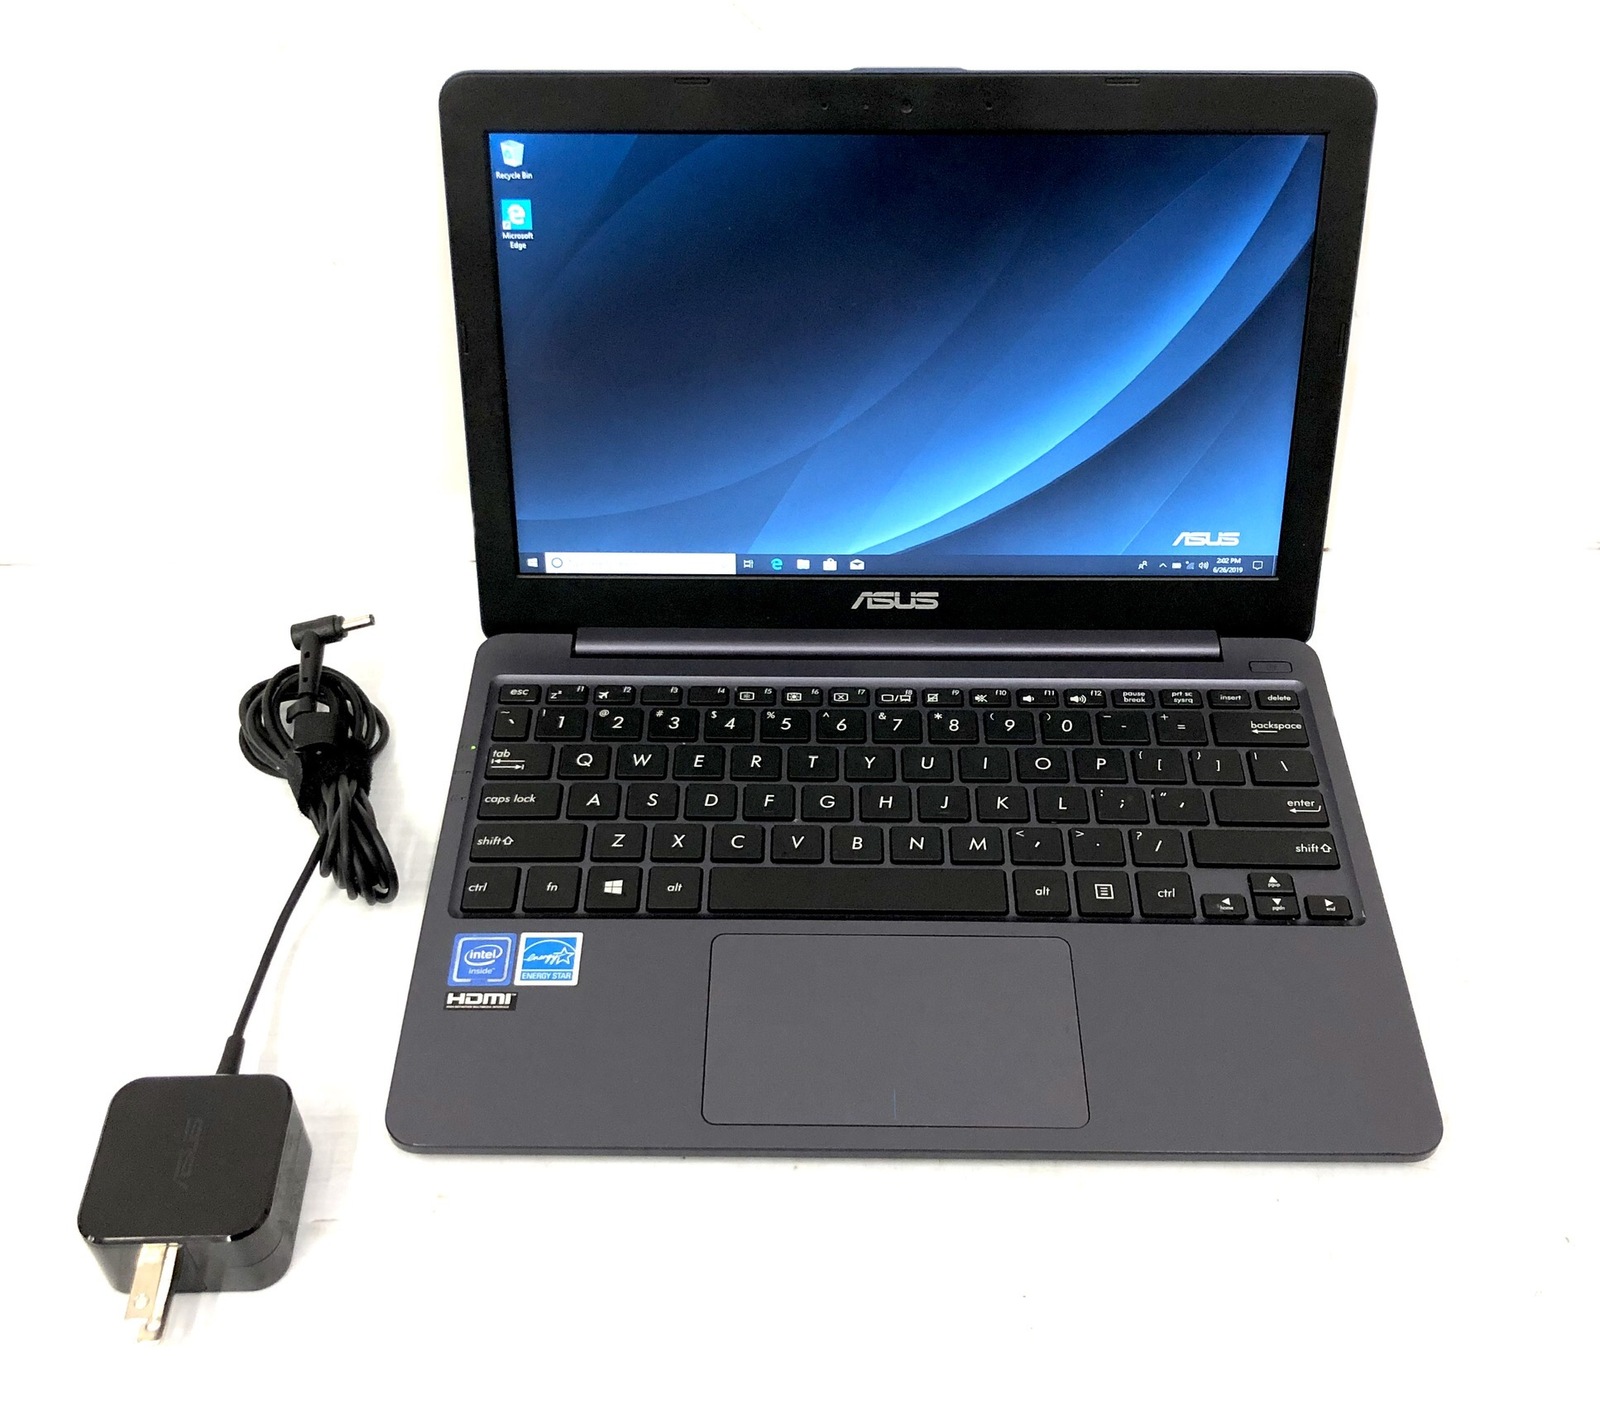 Asus Laptop E203m Pc Laptops And Netbooks